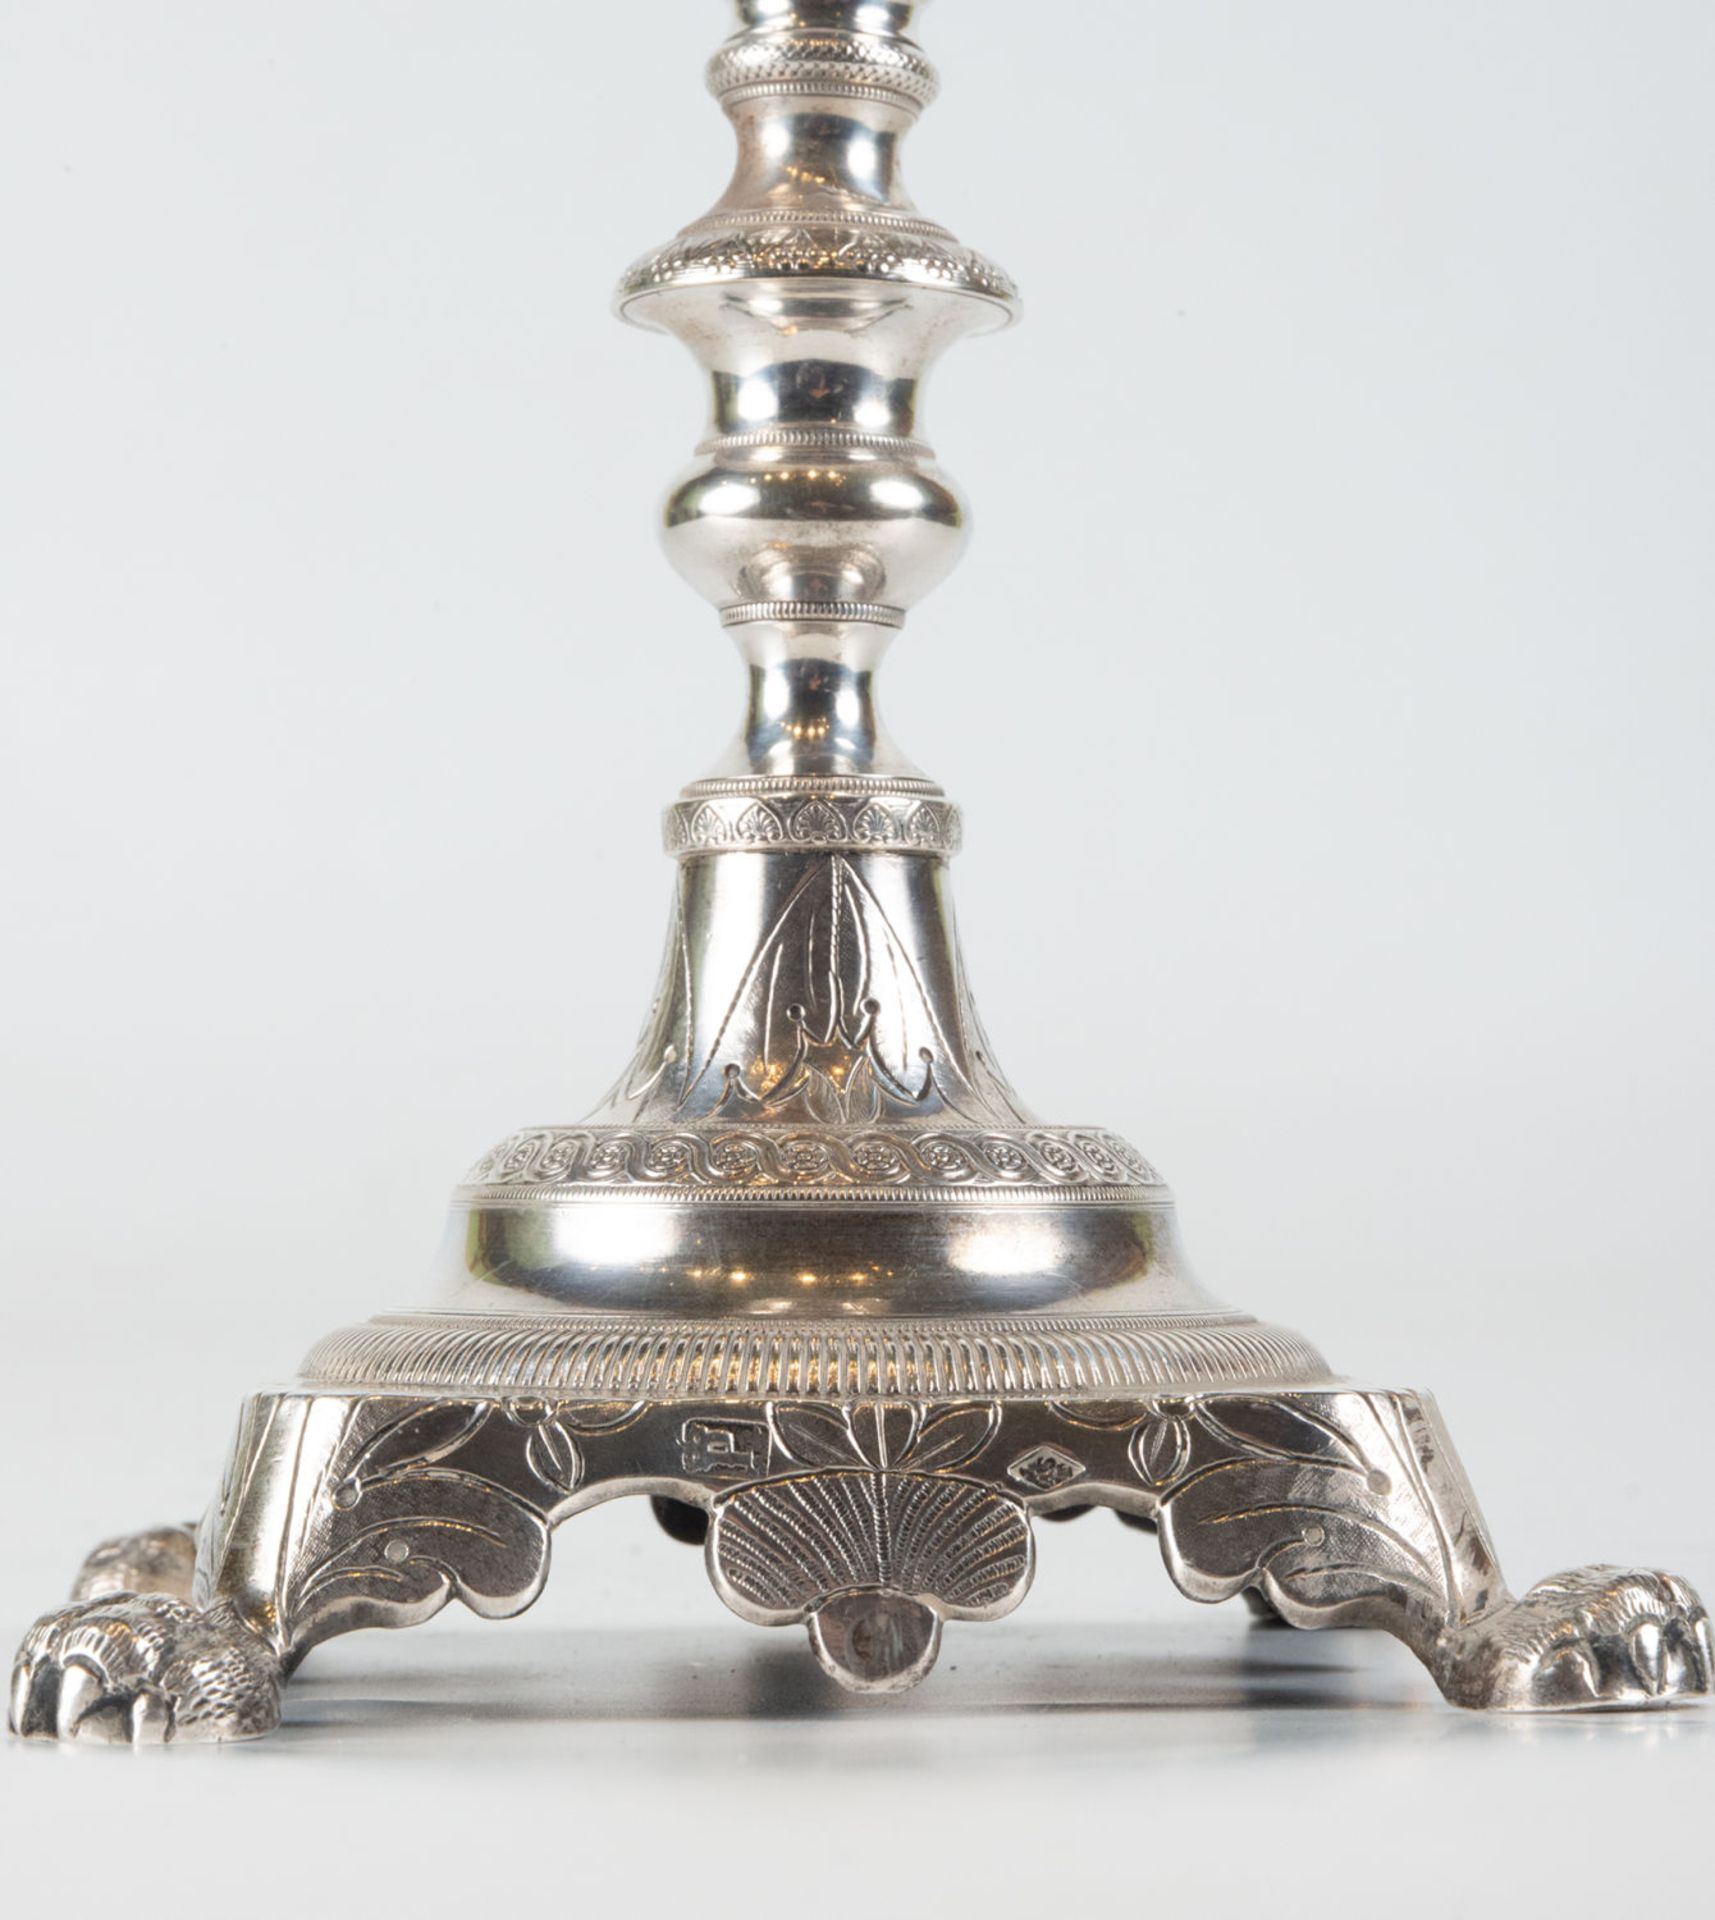 Pair of solid sterling silver candlesticks, 19th century - Image 5 of 9